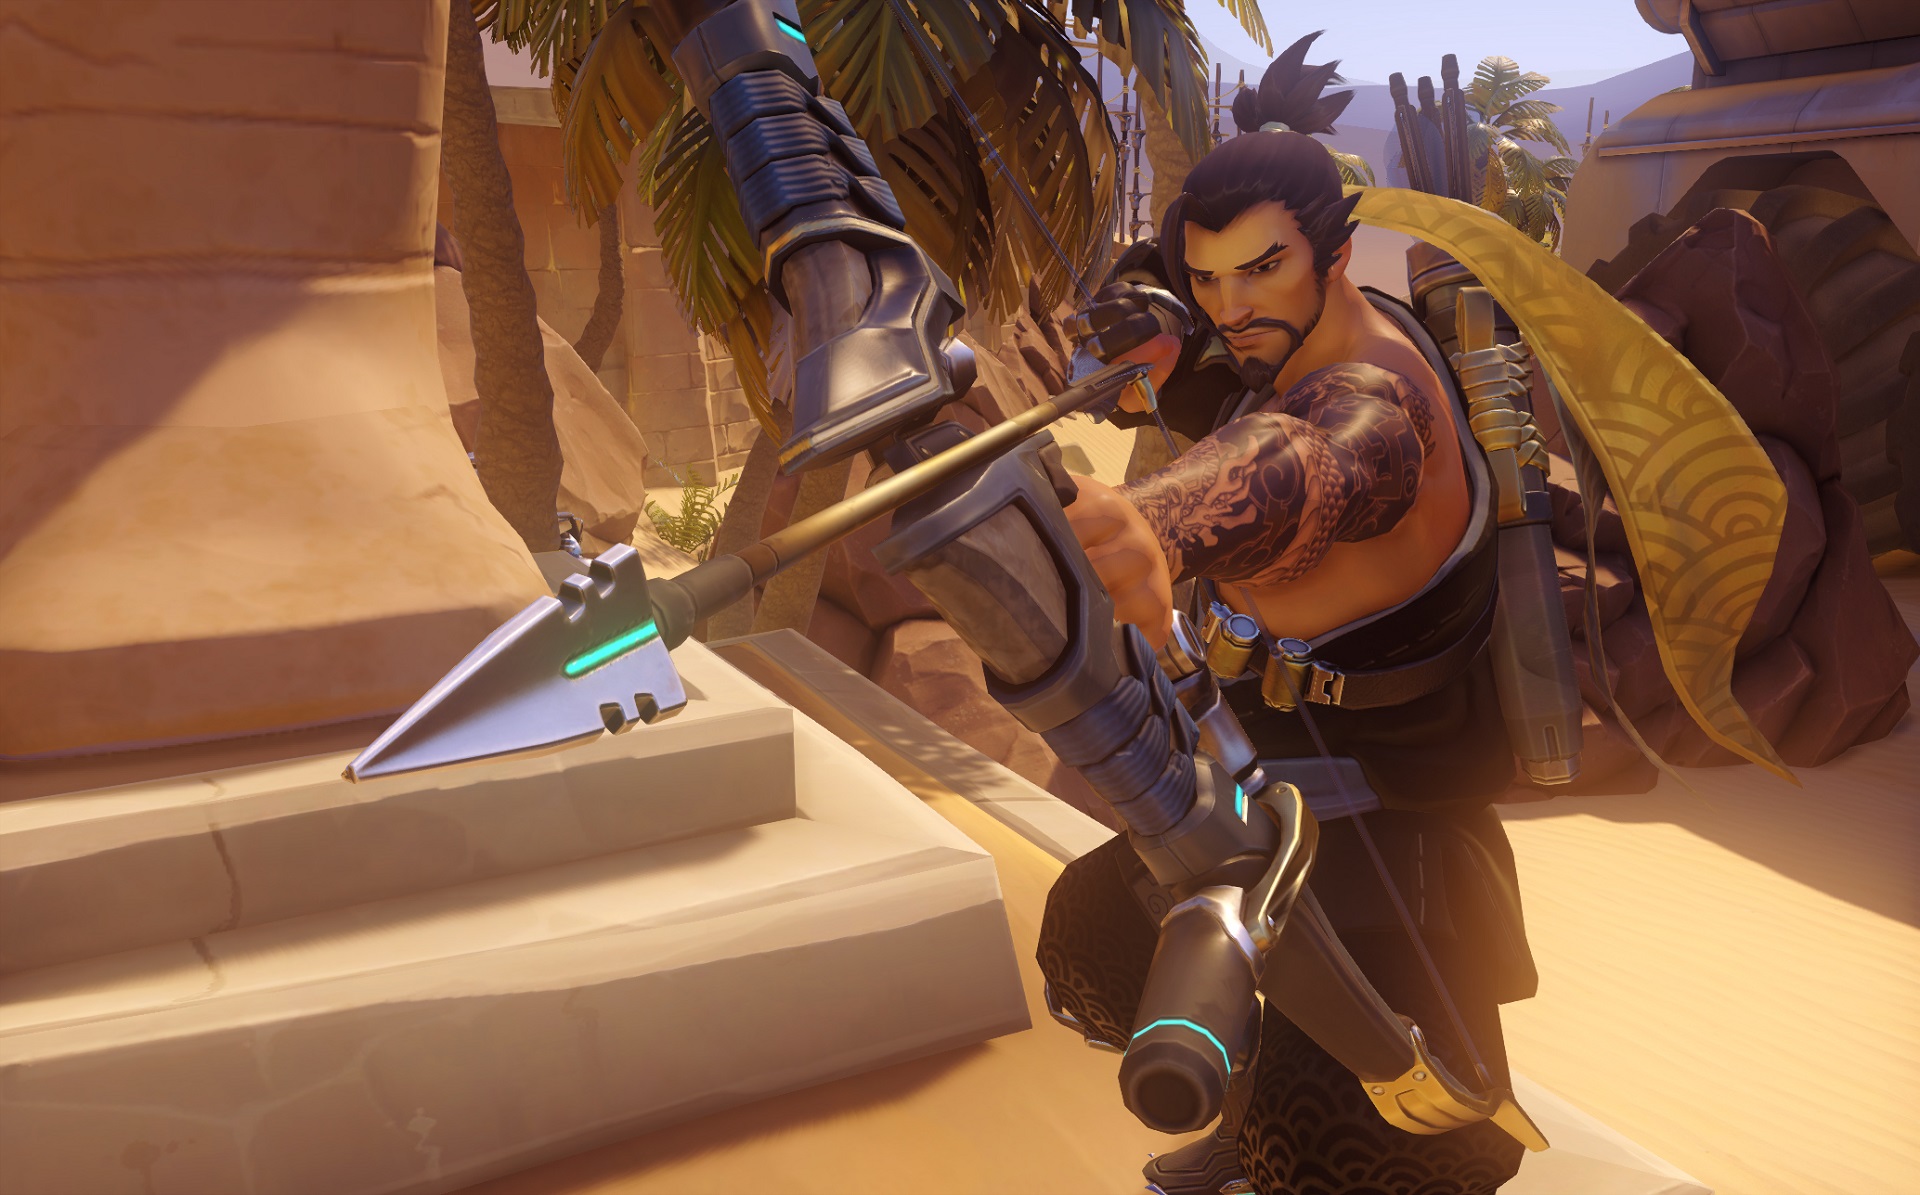 Overwatch’s Hanzo Mains Don’t Think They Deserve All The Hate